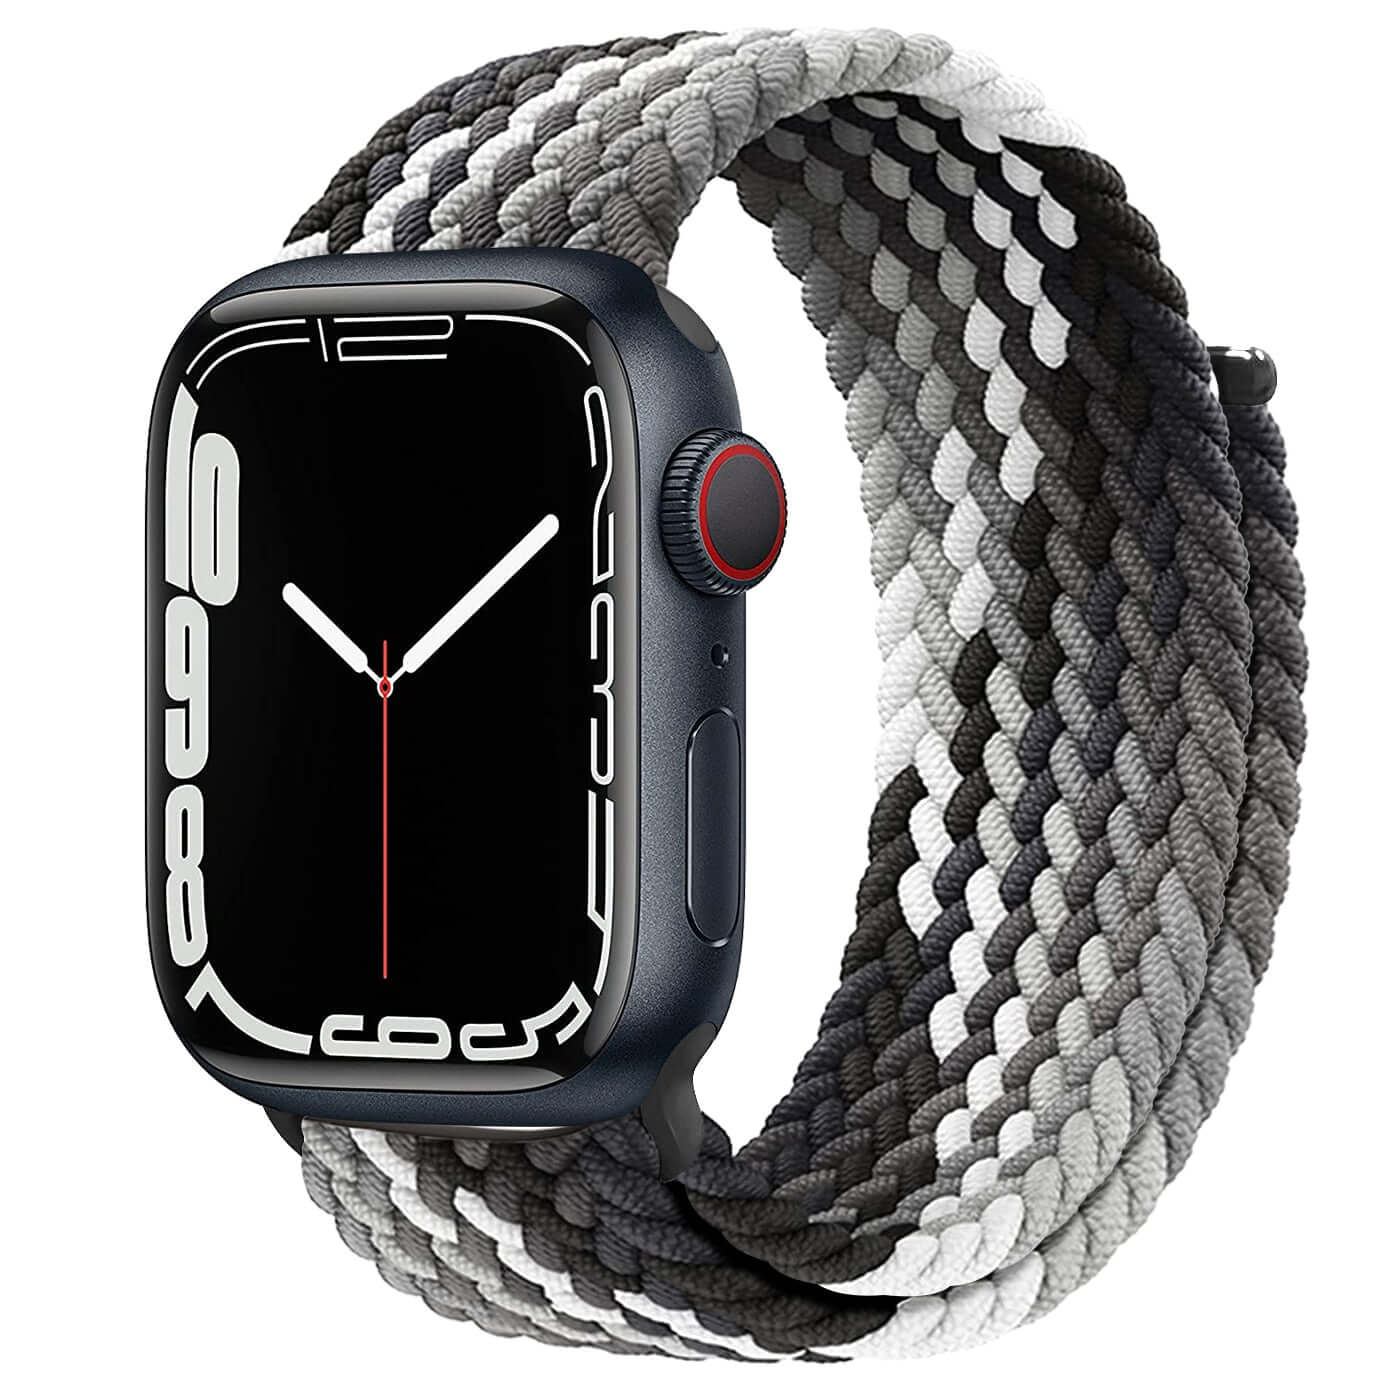 Atphoneshop.com Braided Band Black Clever for Apple Watch 